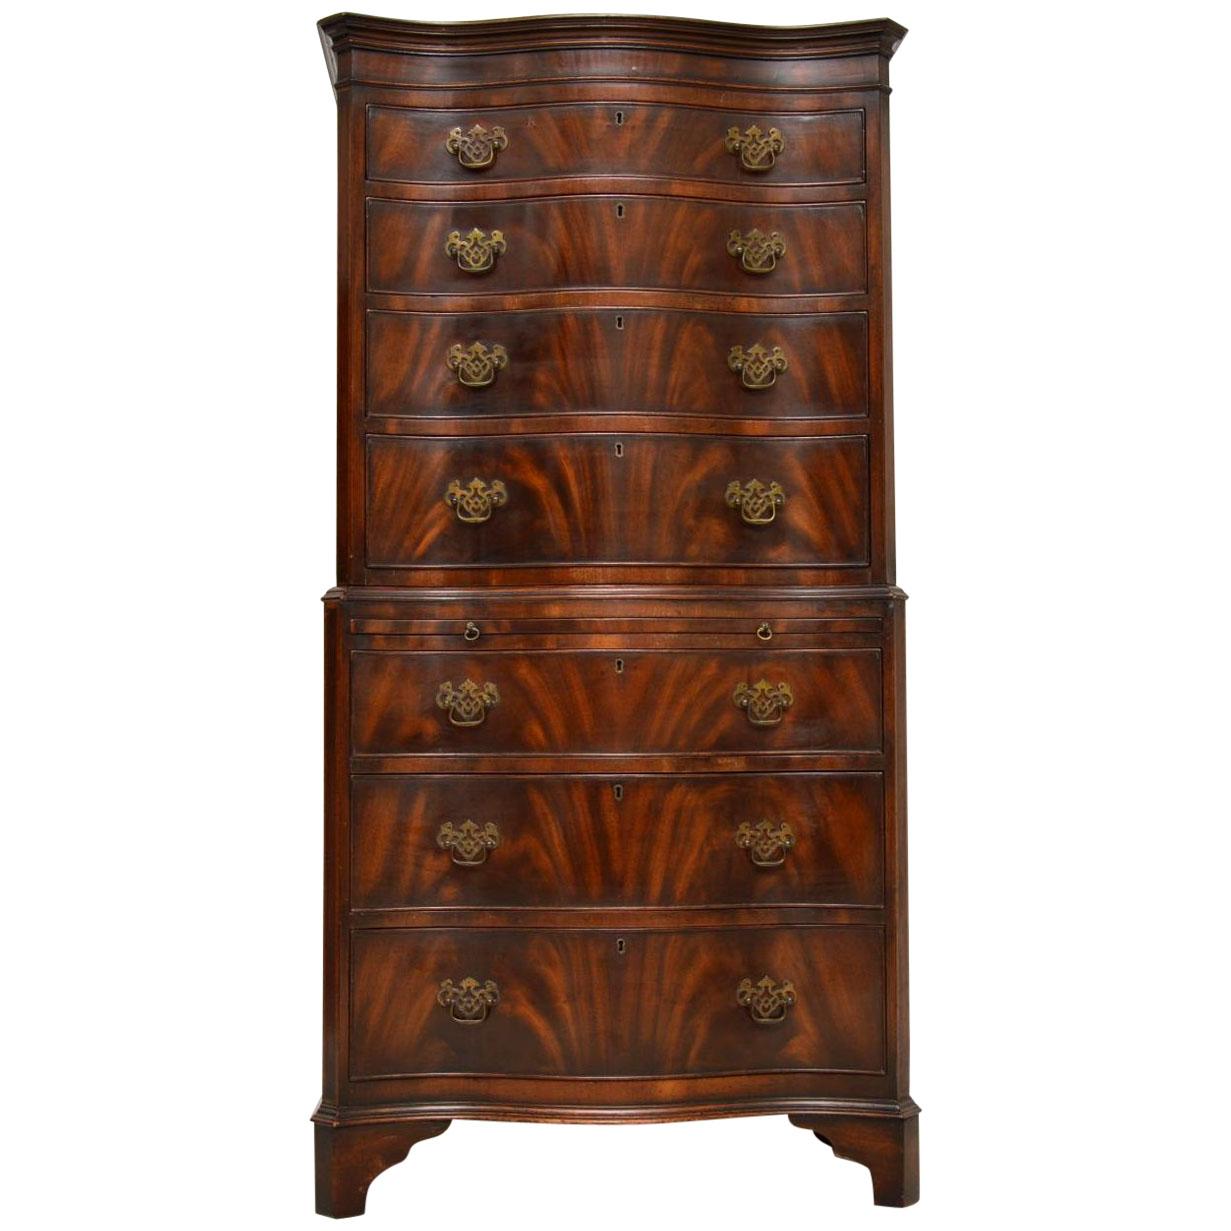 This antique mahogany serpentine fronted chest on chest is extremely fine quality and in excellent condition. It has a wonderfully patterned flame mahogany running though all the drawers. The drawers are all graduated in depth, with original brass